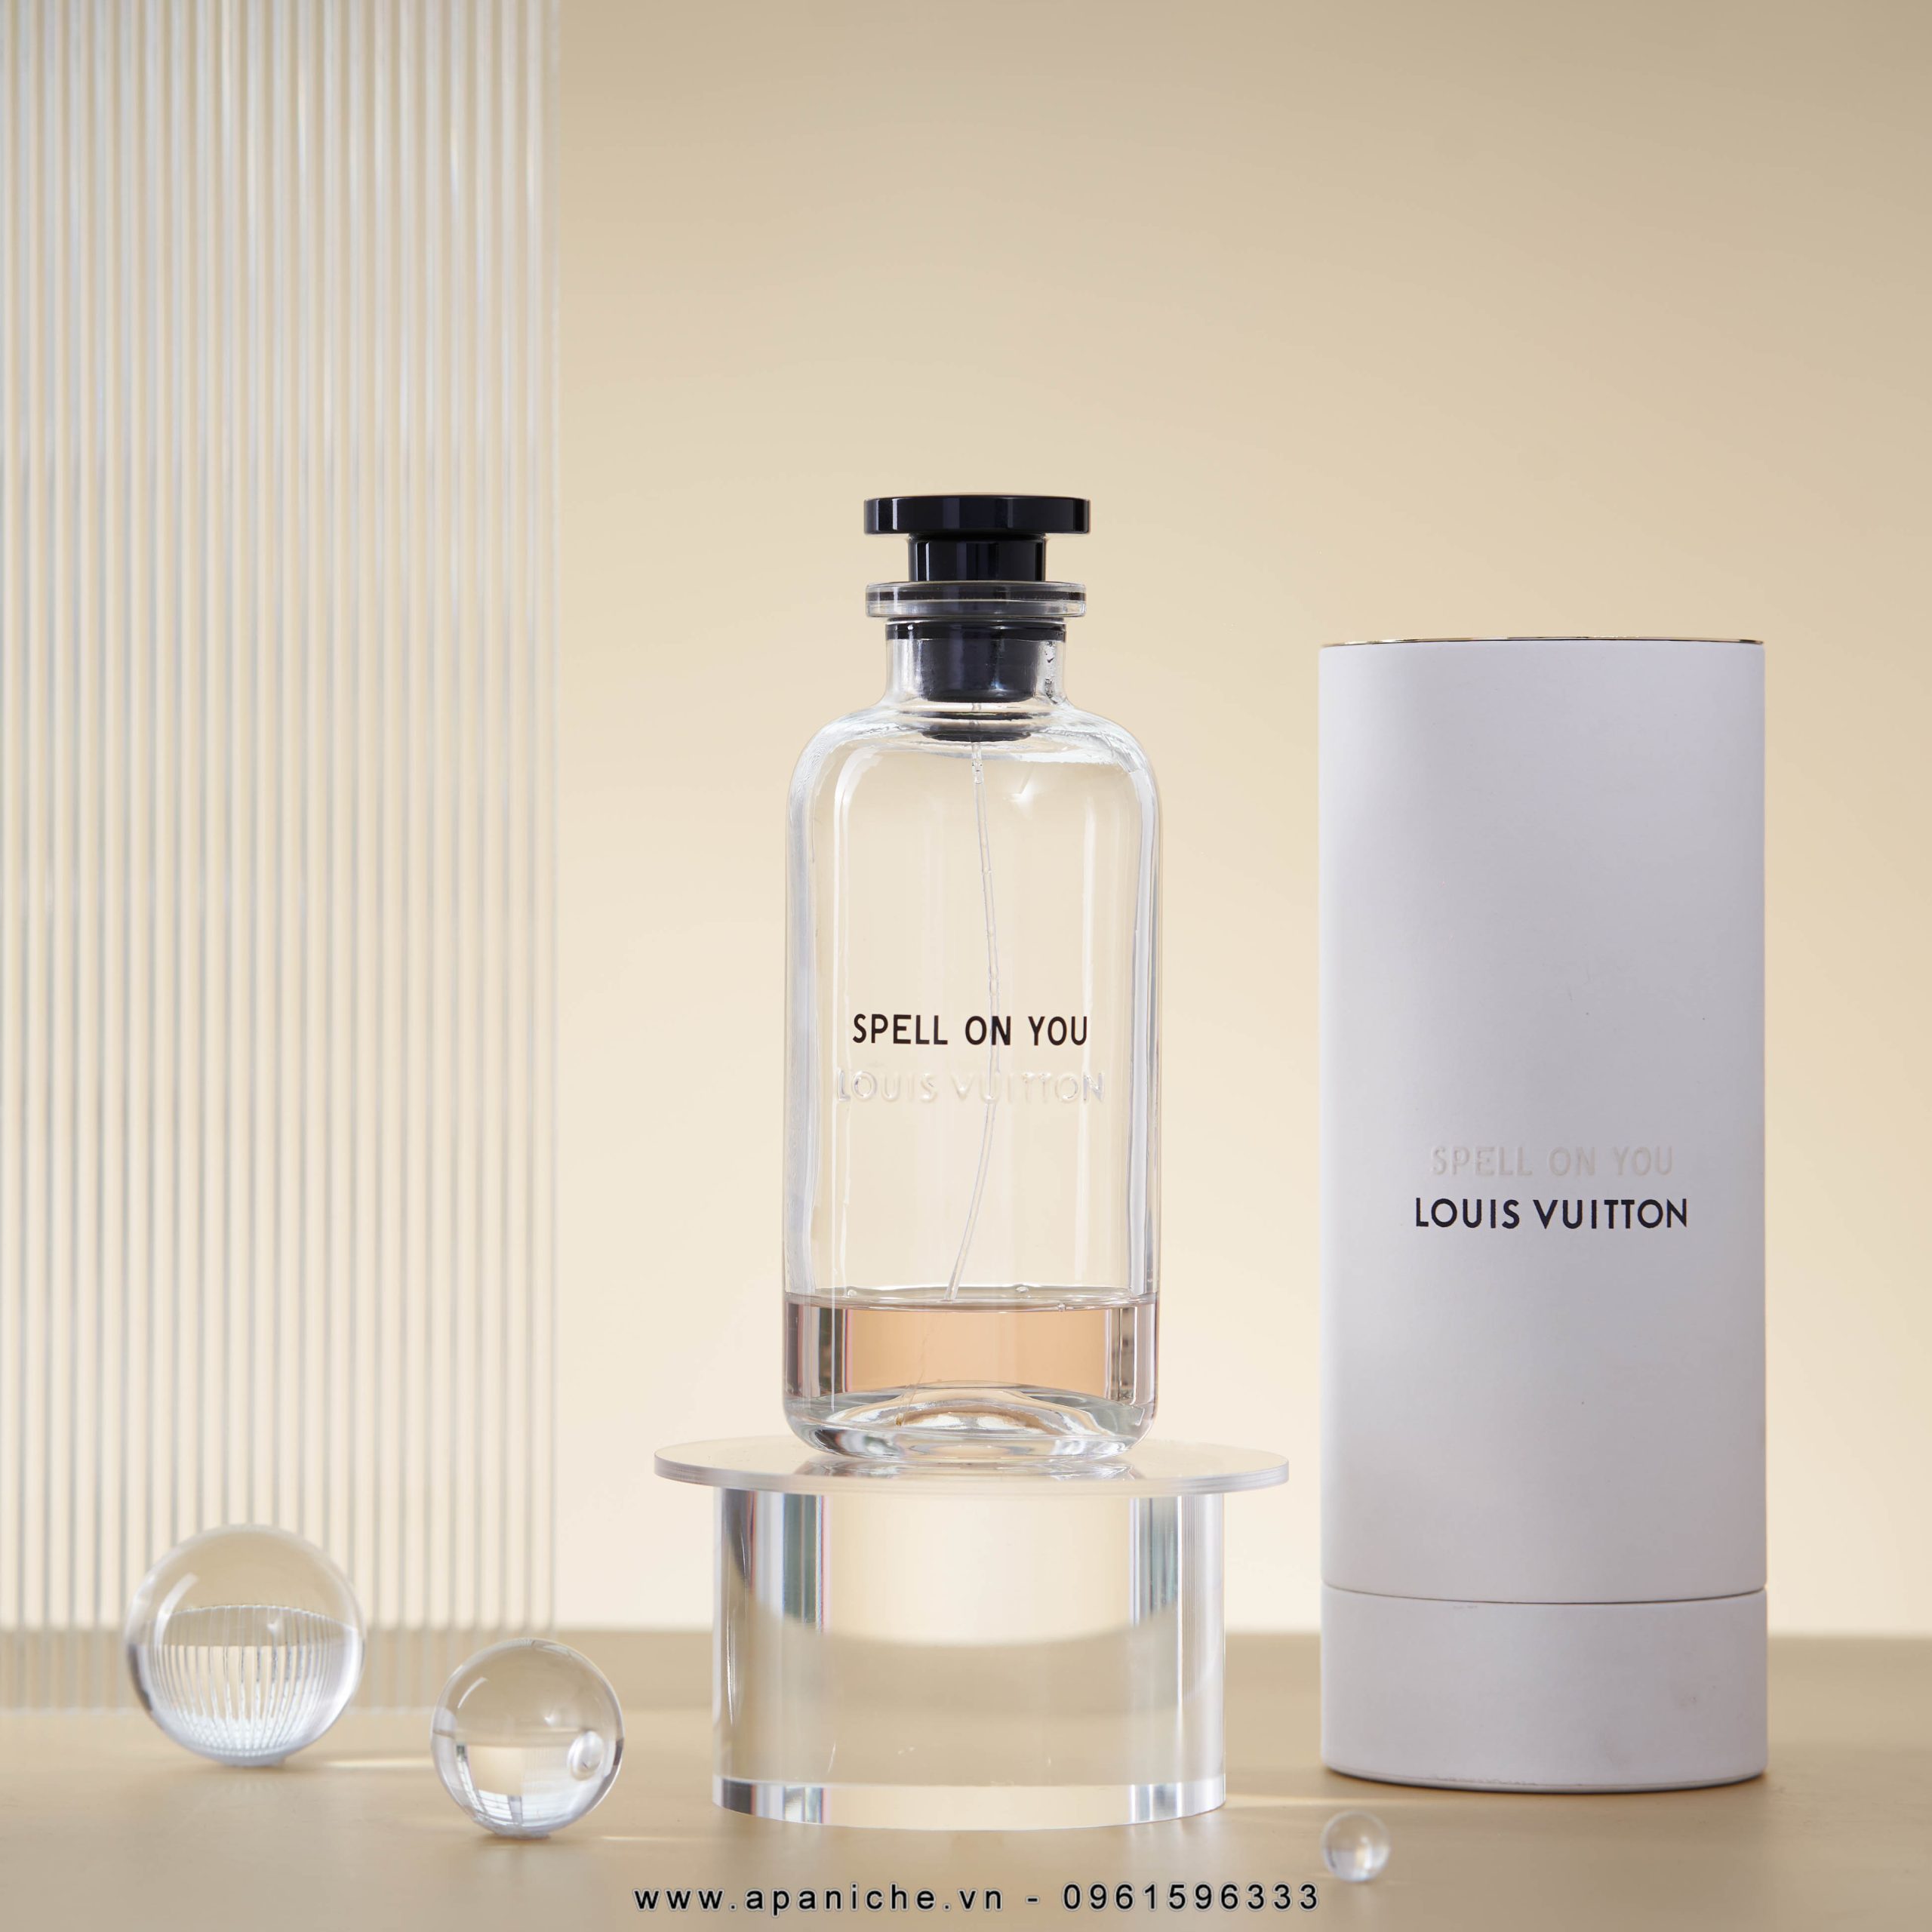 Louis-Vuitton-Spell-On-You-EDP-gia-tot-nhat